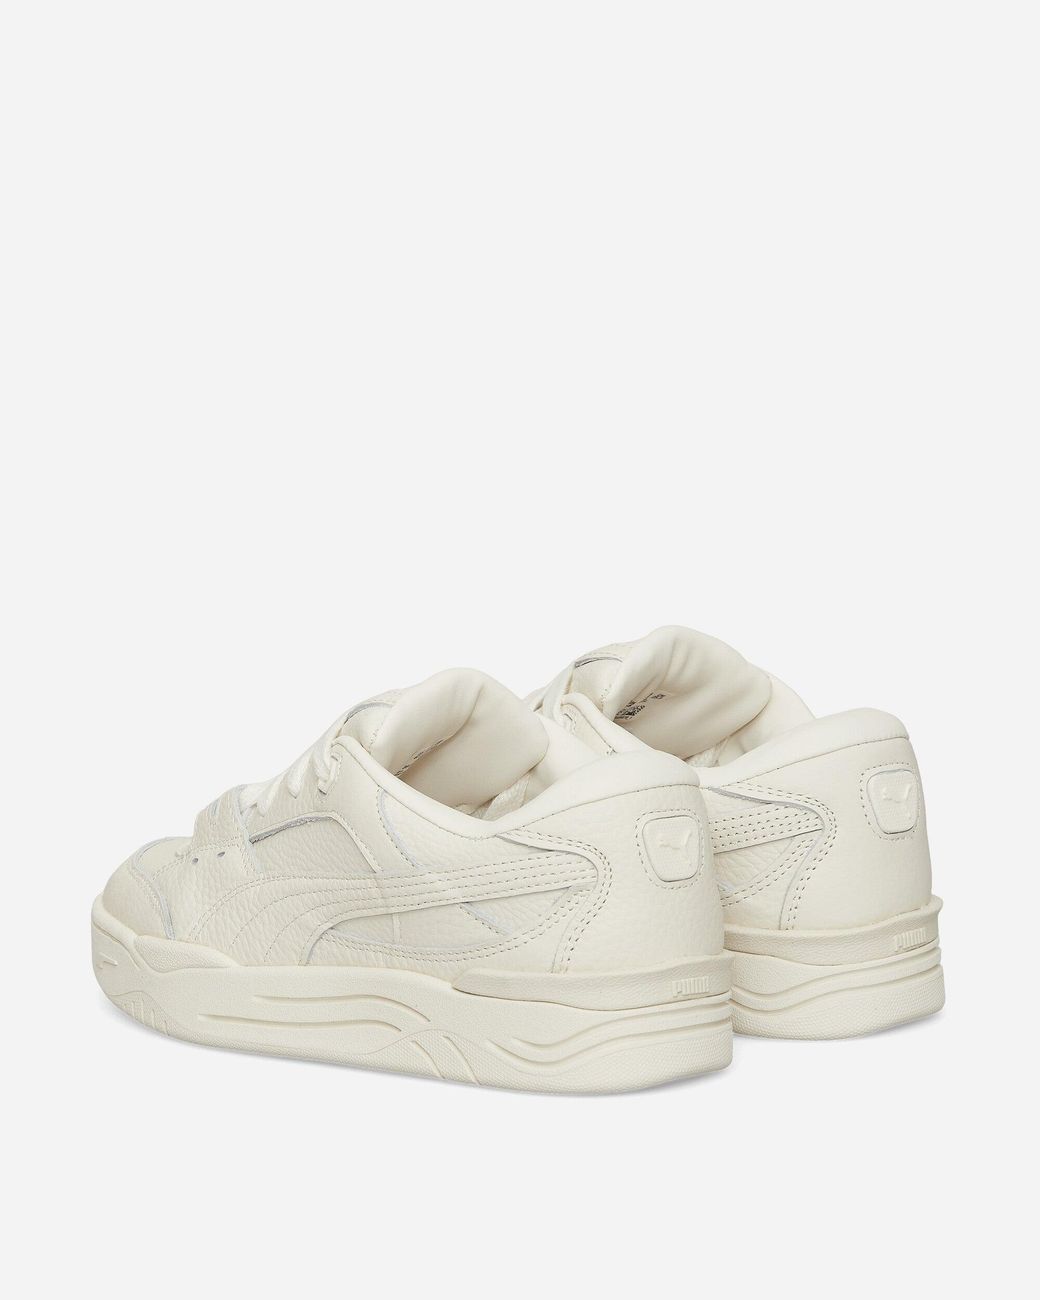 PUMA 180 Prm Sneakers Warm in Natural for Men | Lyst